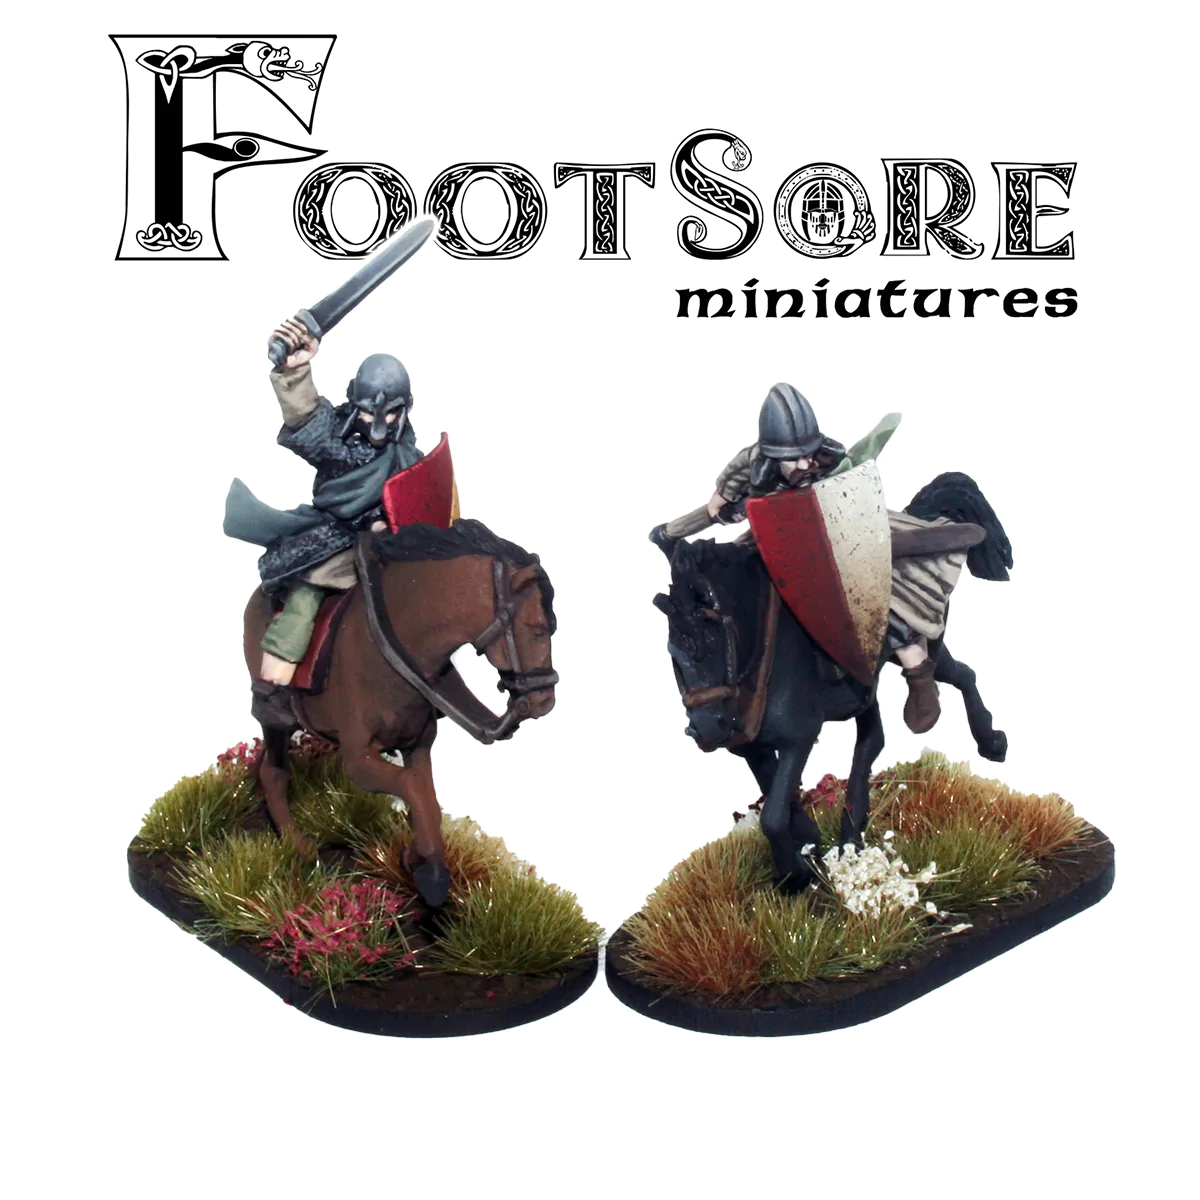 Footsore Miniatures WLS203HS Welsh Hearthguard Medieval Cavalry